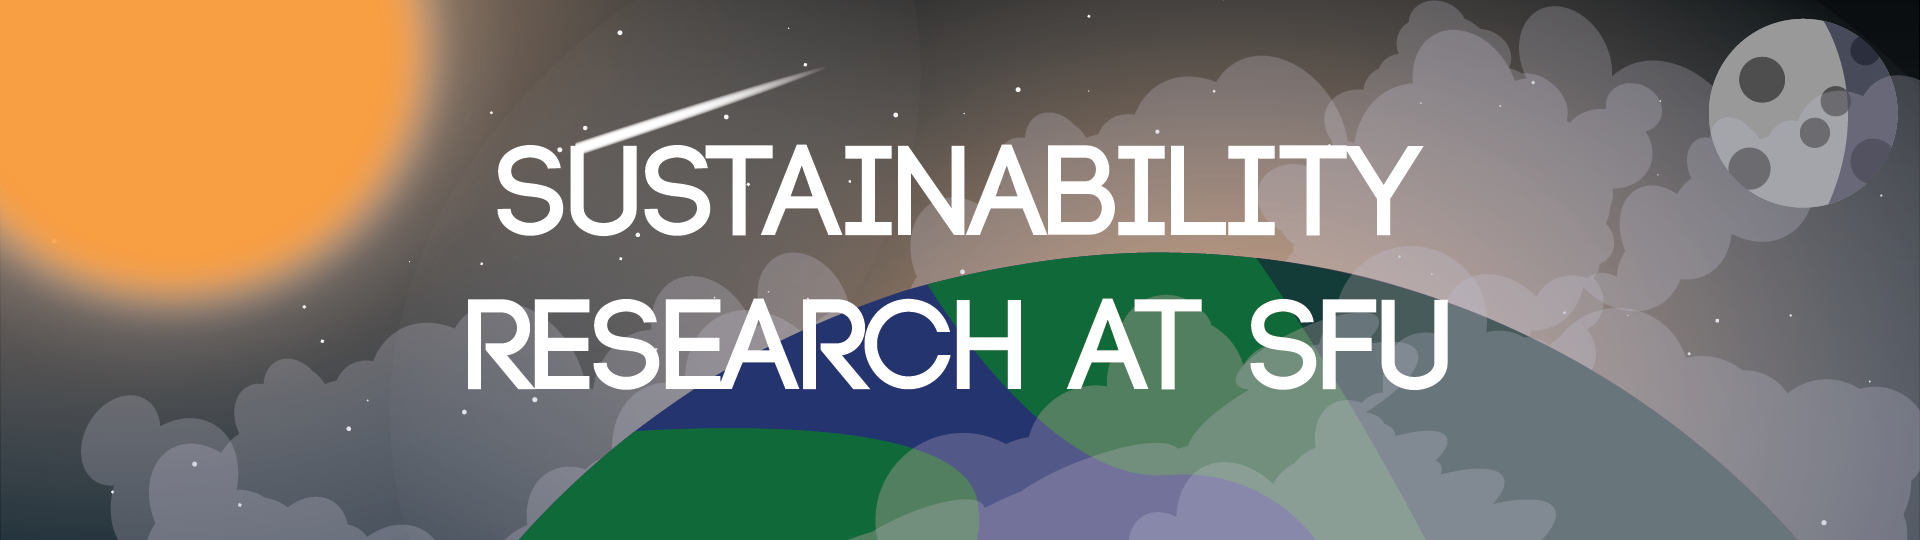 Header photo with Sustainability Research Title